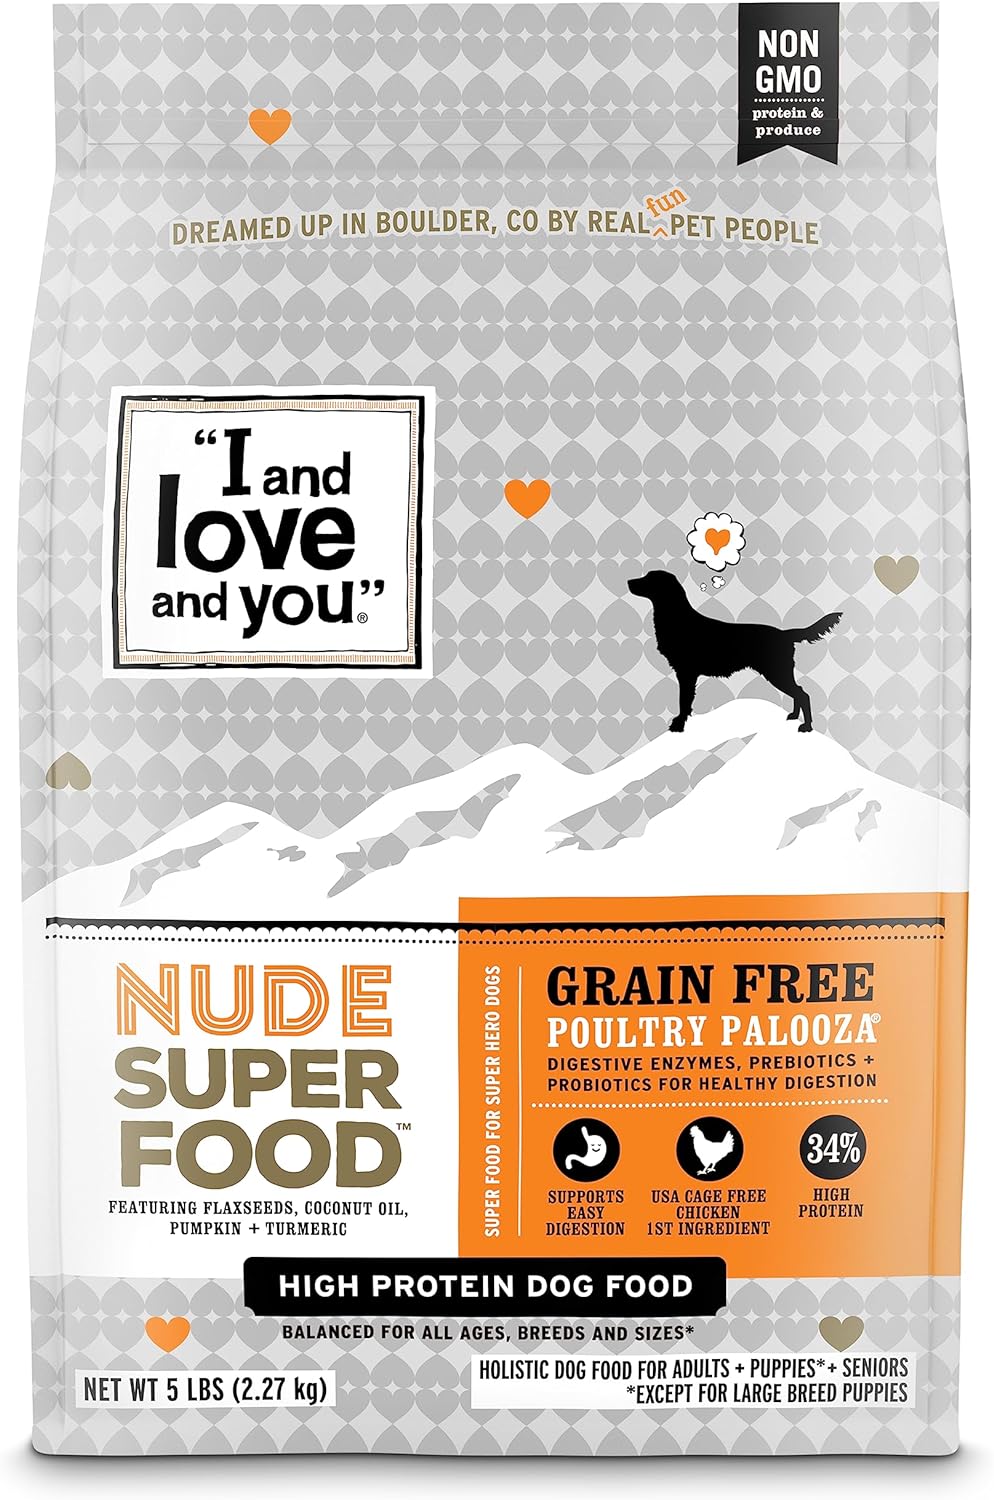 I and love and you Nude Super Food Dry Dog Food - Turkey + Chicken - Prebiotic + Probiotic, Grain Free, Real Meat, No Fillers, 23lb Bag